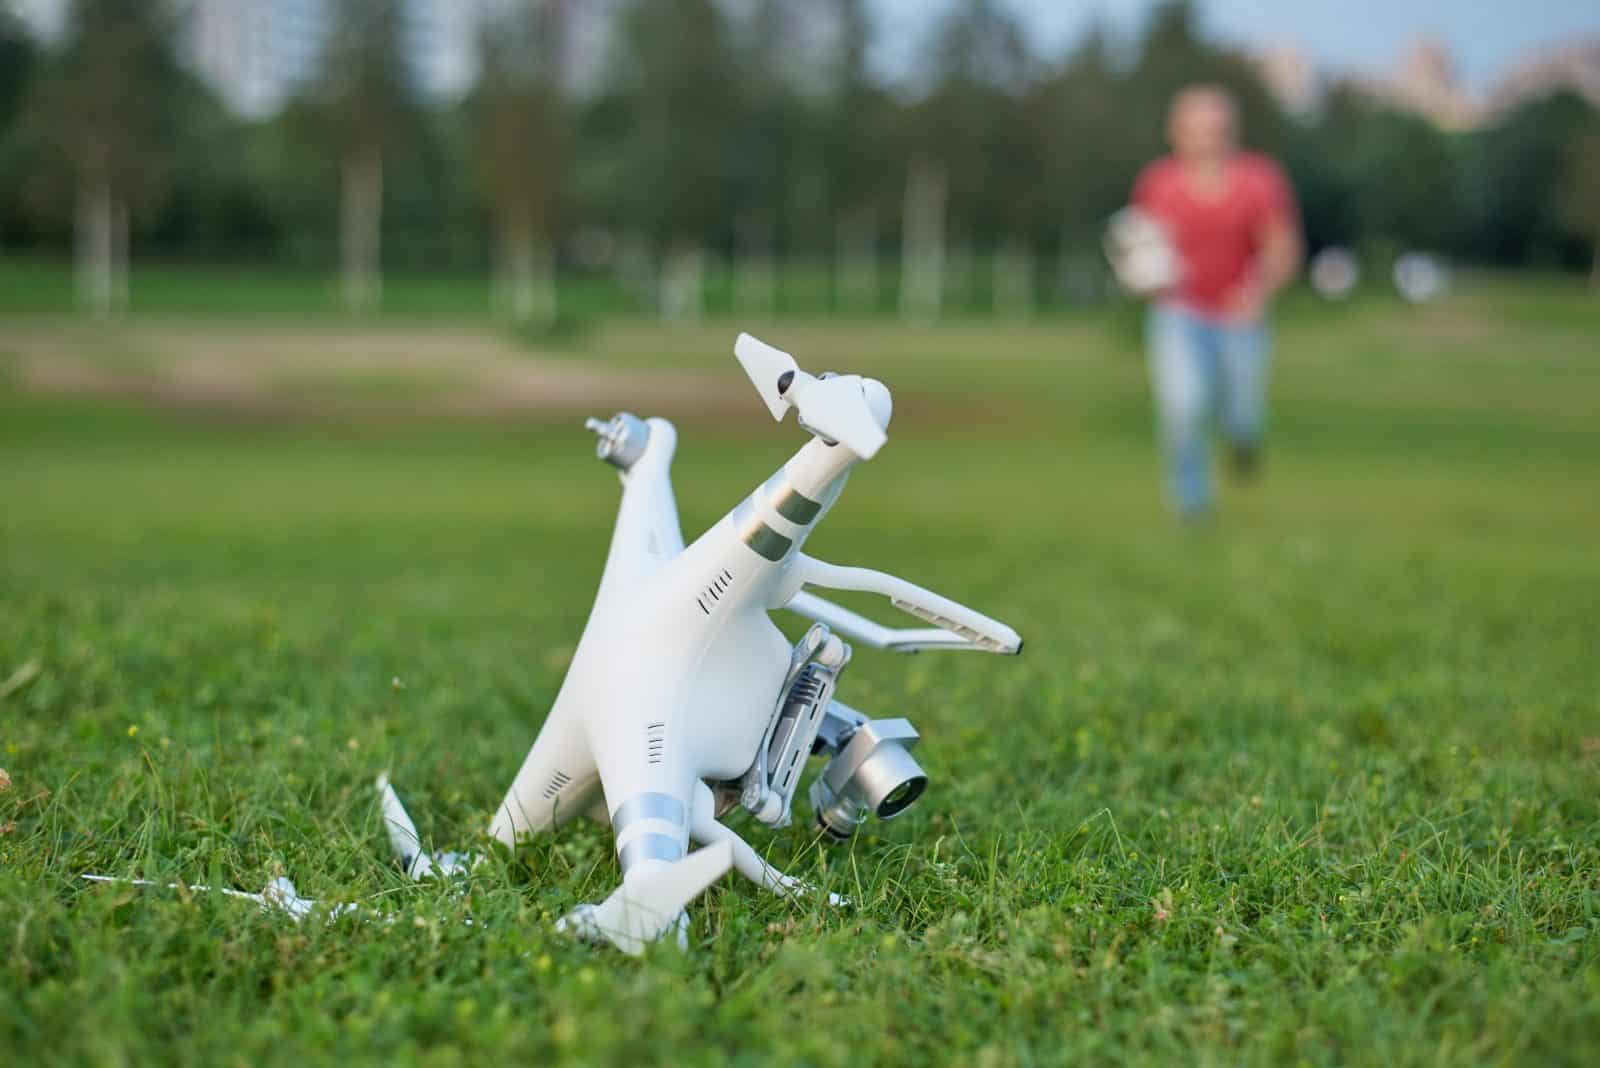 Is Drone Insurance Worth the Money? - dronegenuity